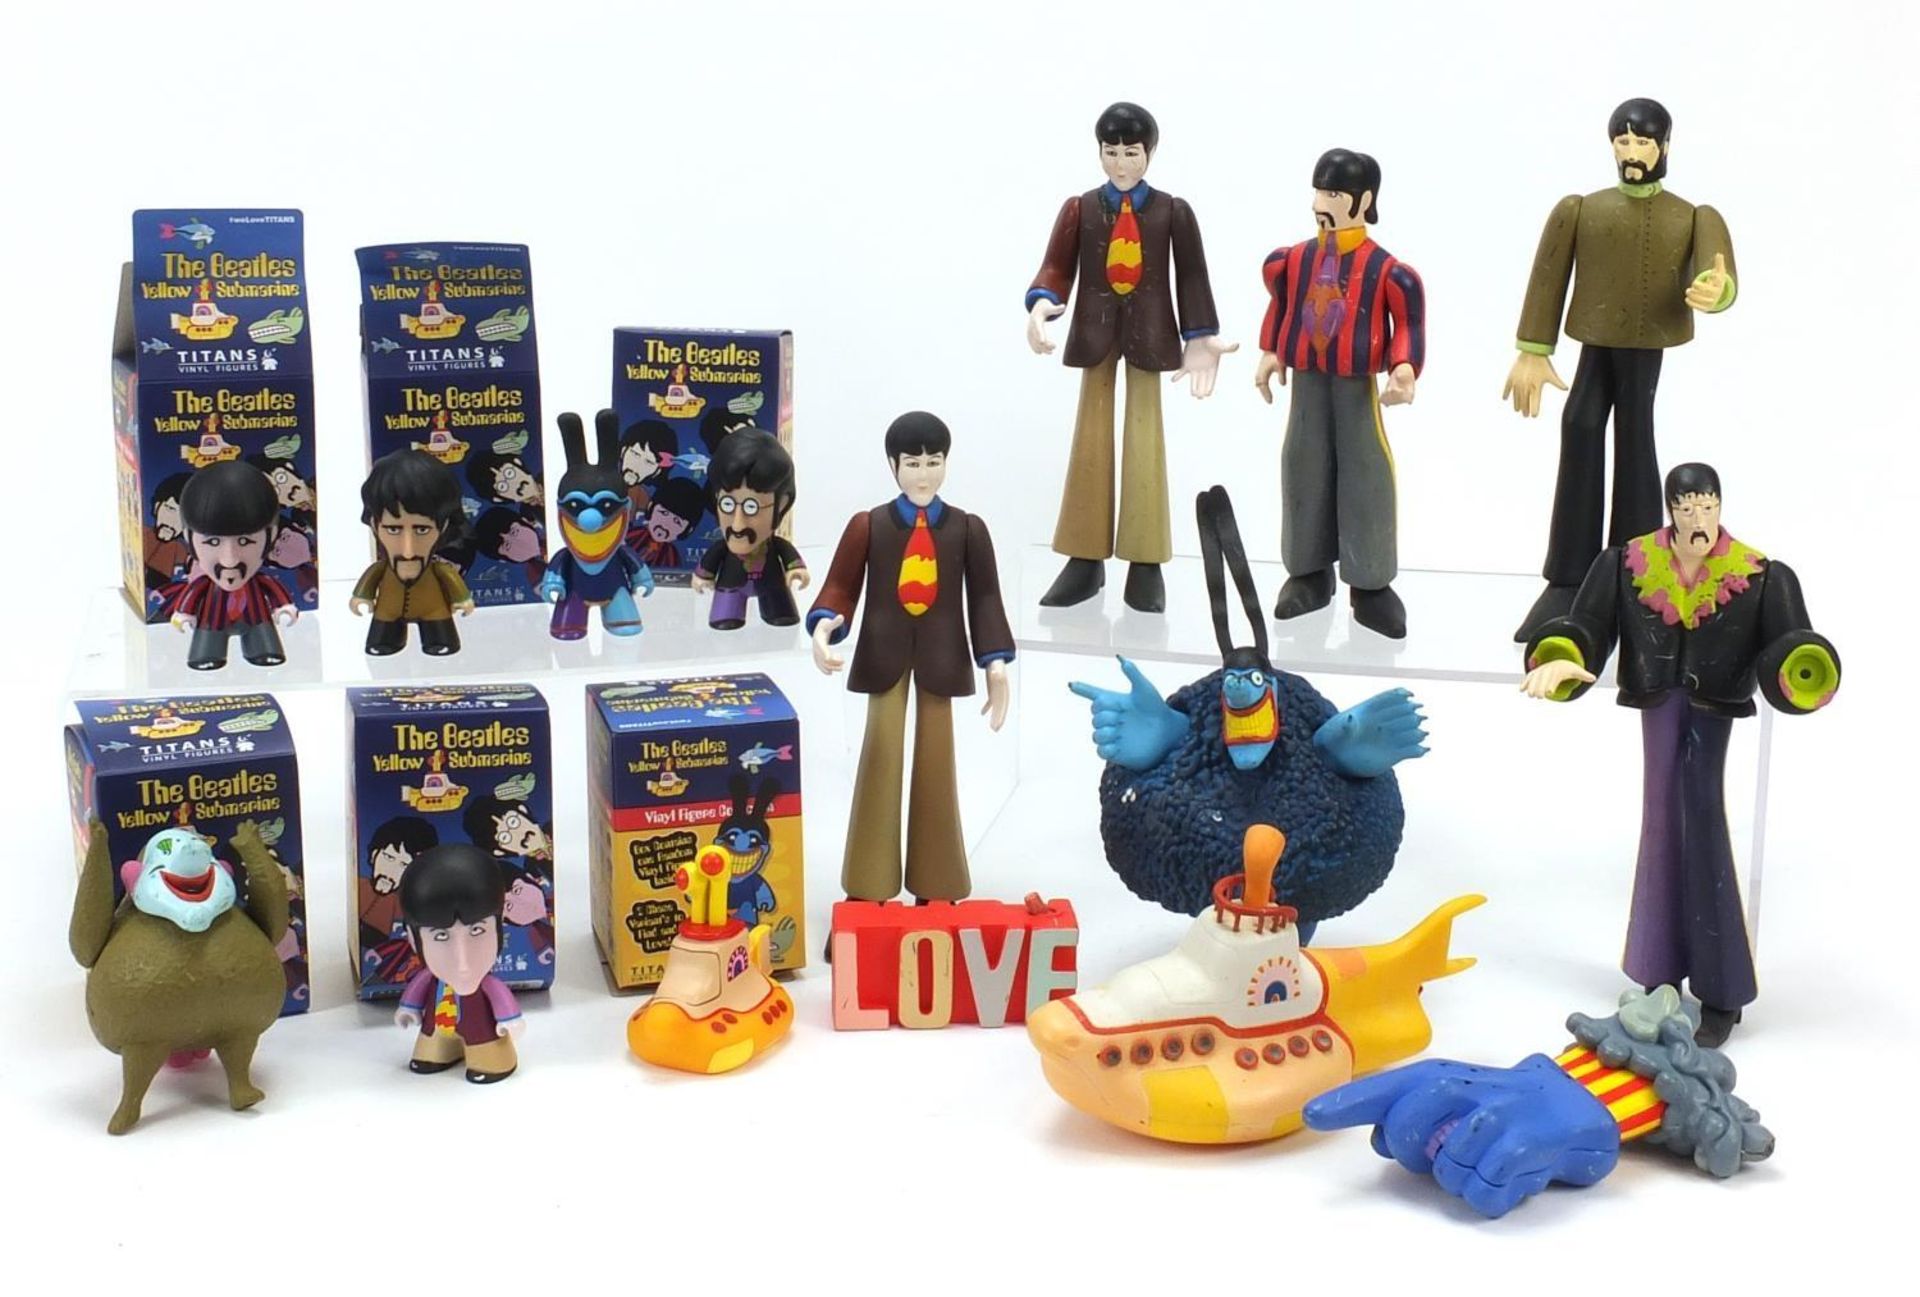 Vintage and later Beatles toys including Subafilms Action figures and Titans vinyl figures, the